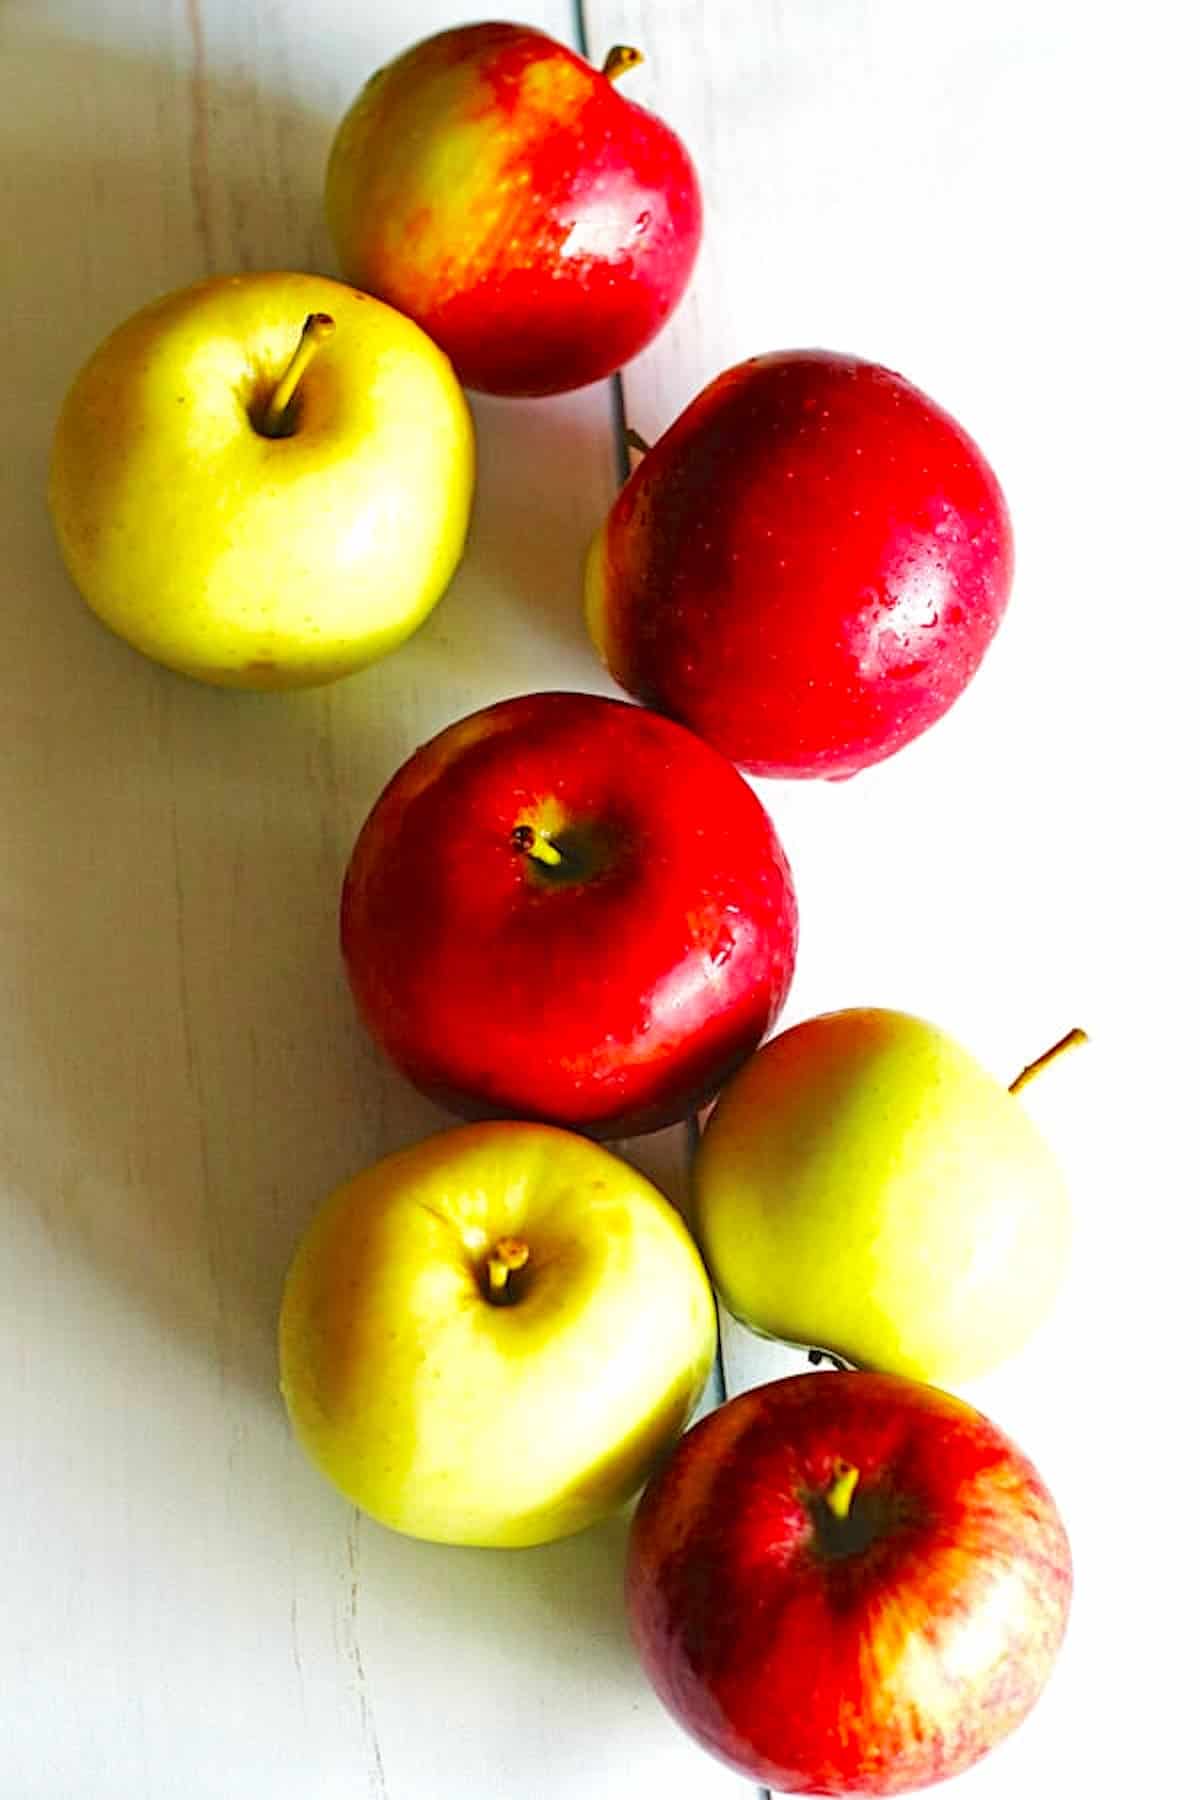 Red and green apples on a white table